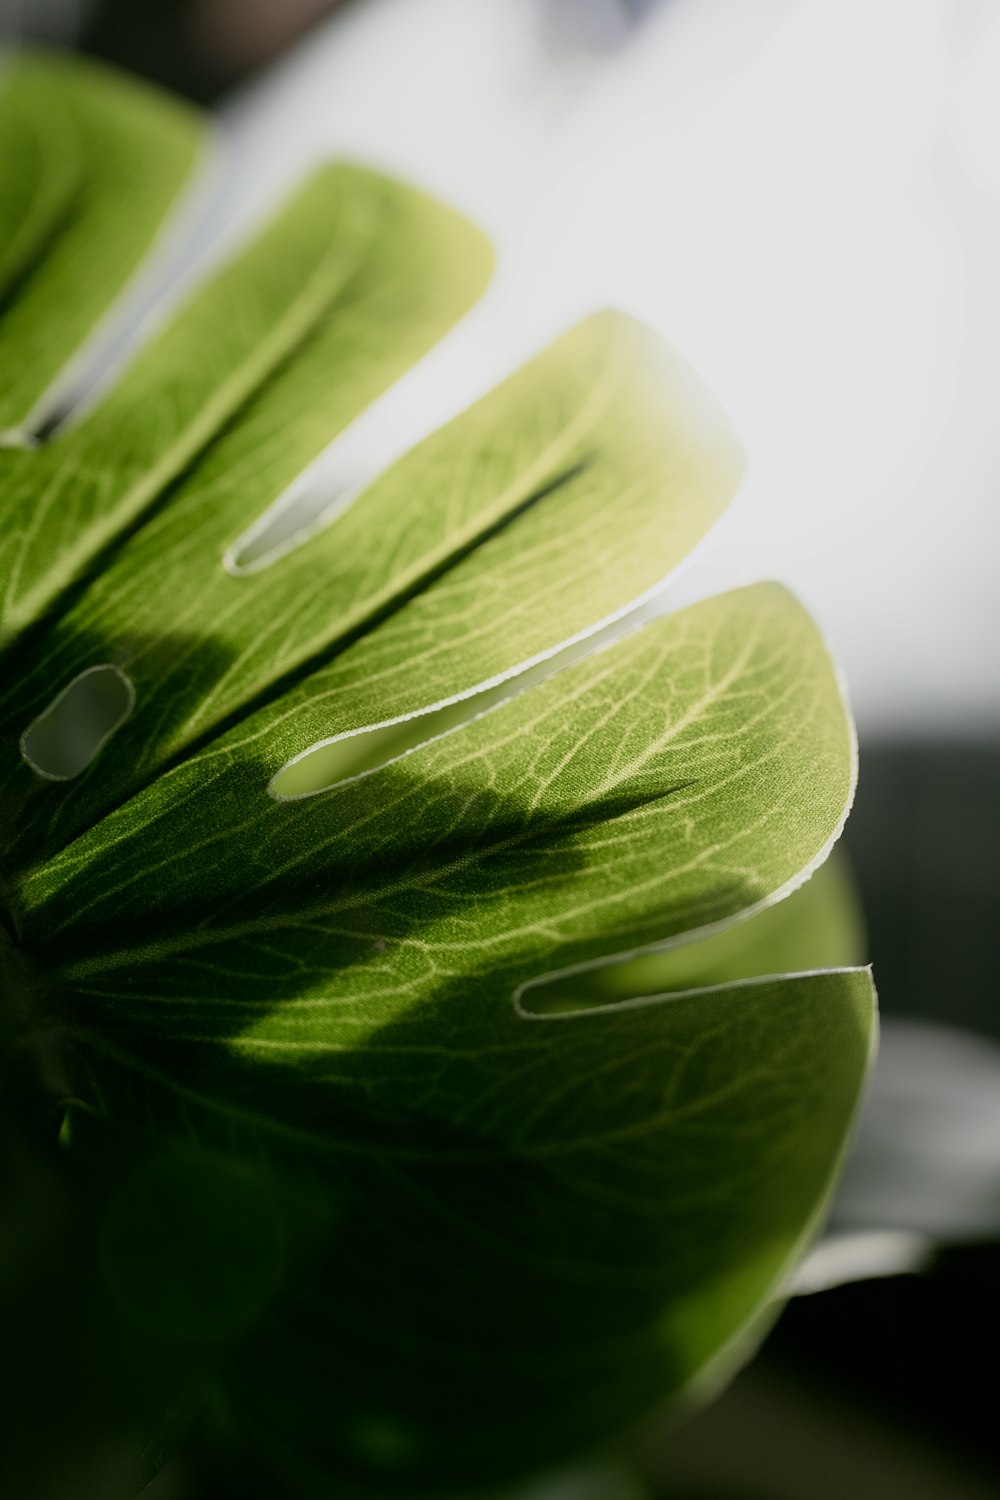 a close up of a green leaf on a table